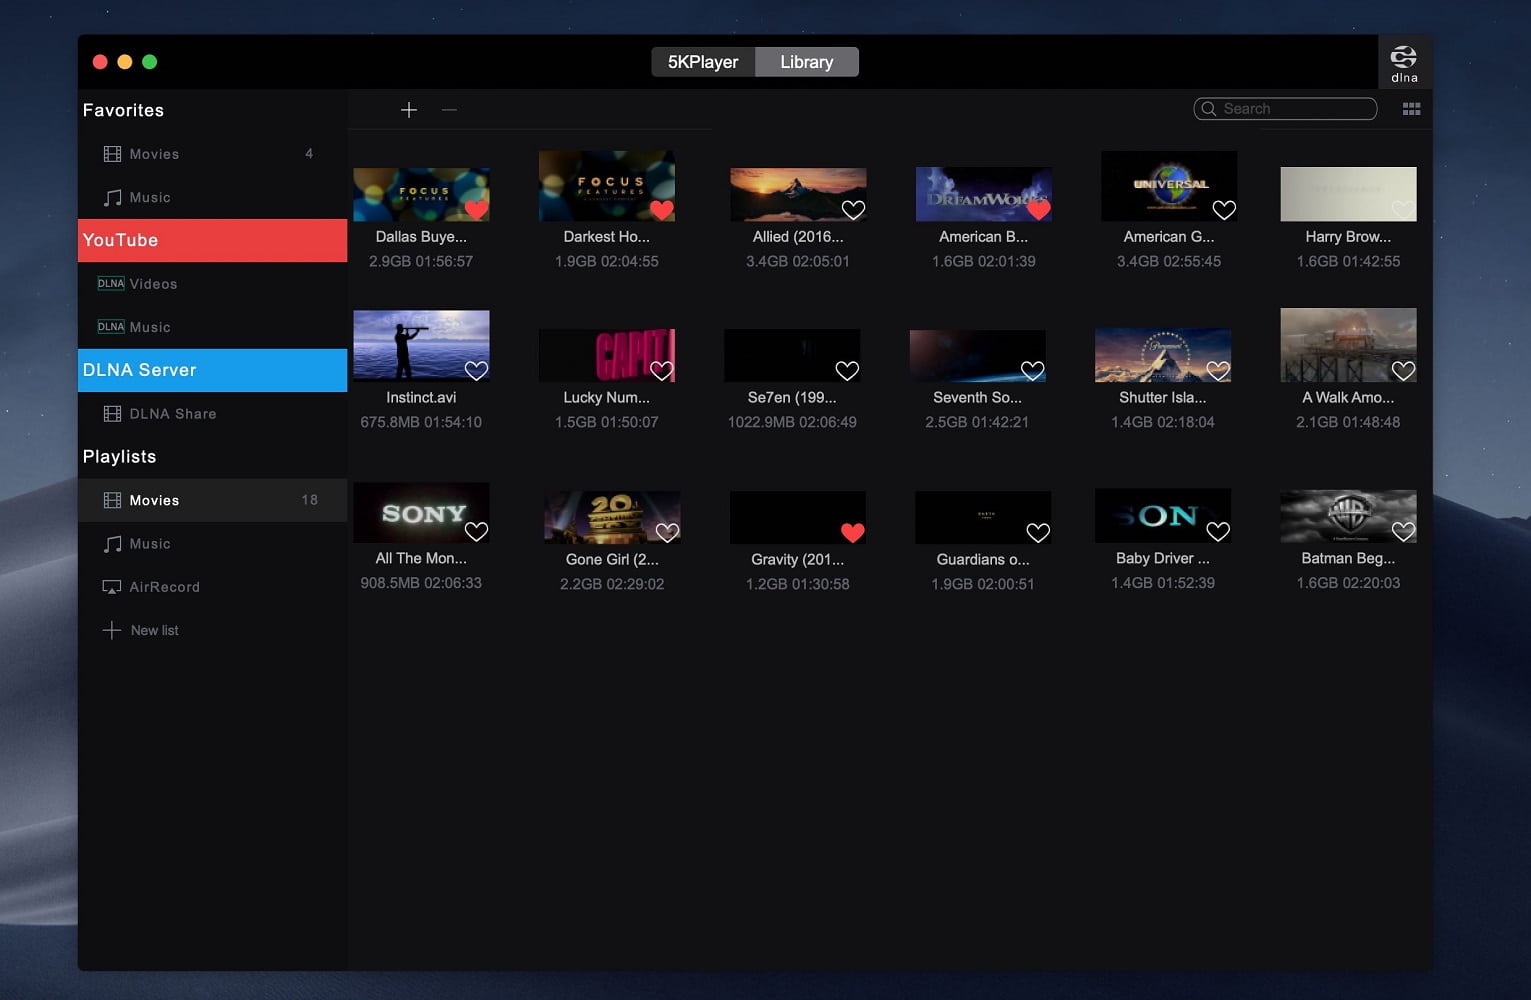 Movist is an easy-to-use movie player